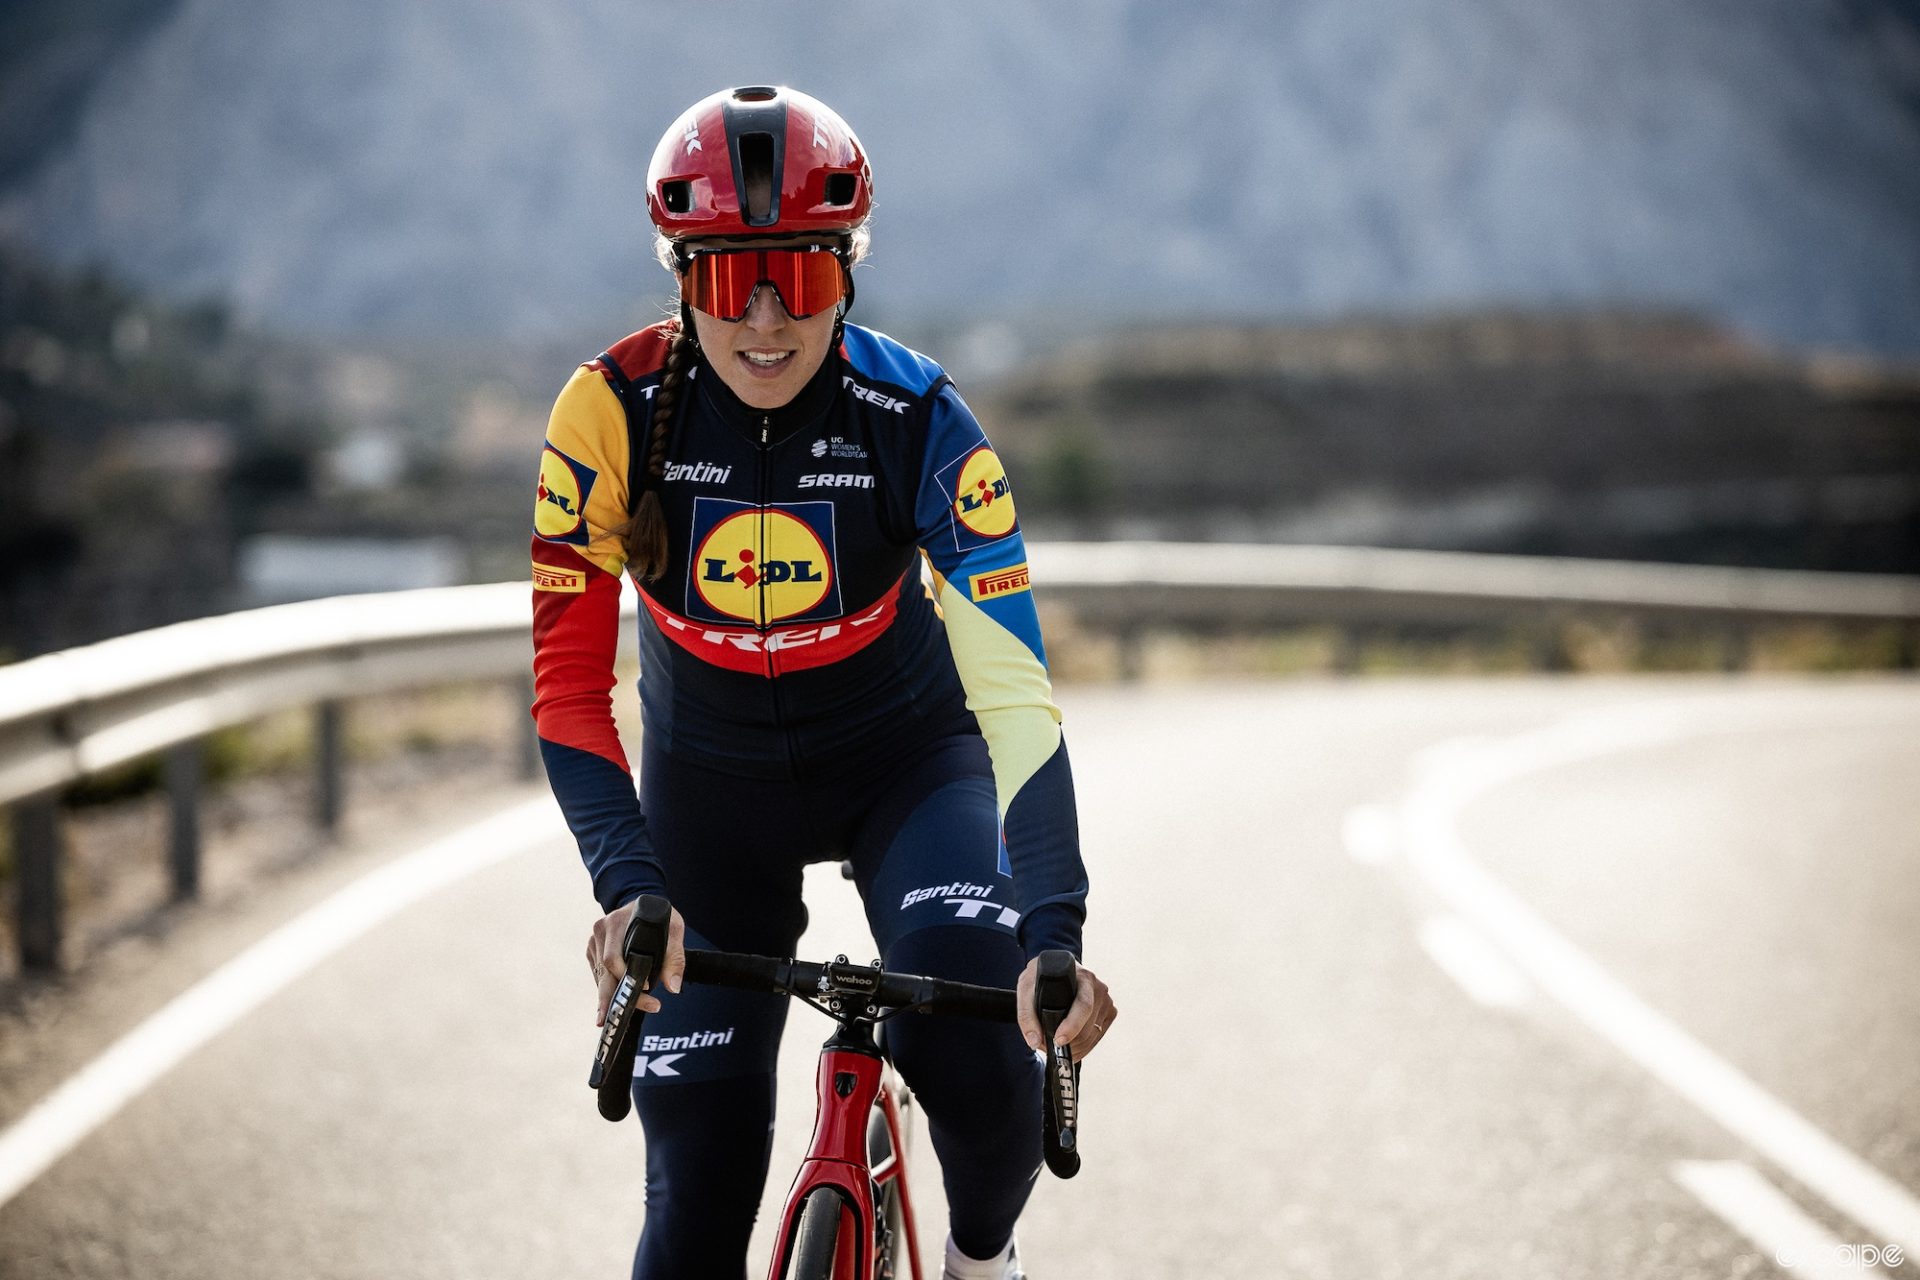 Shirin van Anrooij climbing out of the saddle. Her Lidl-Trek kit features bold blocks of primary colors, with a blue and red body broken up by bright yellow around the distinctive Lidl logo.